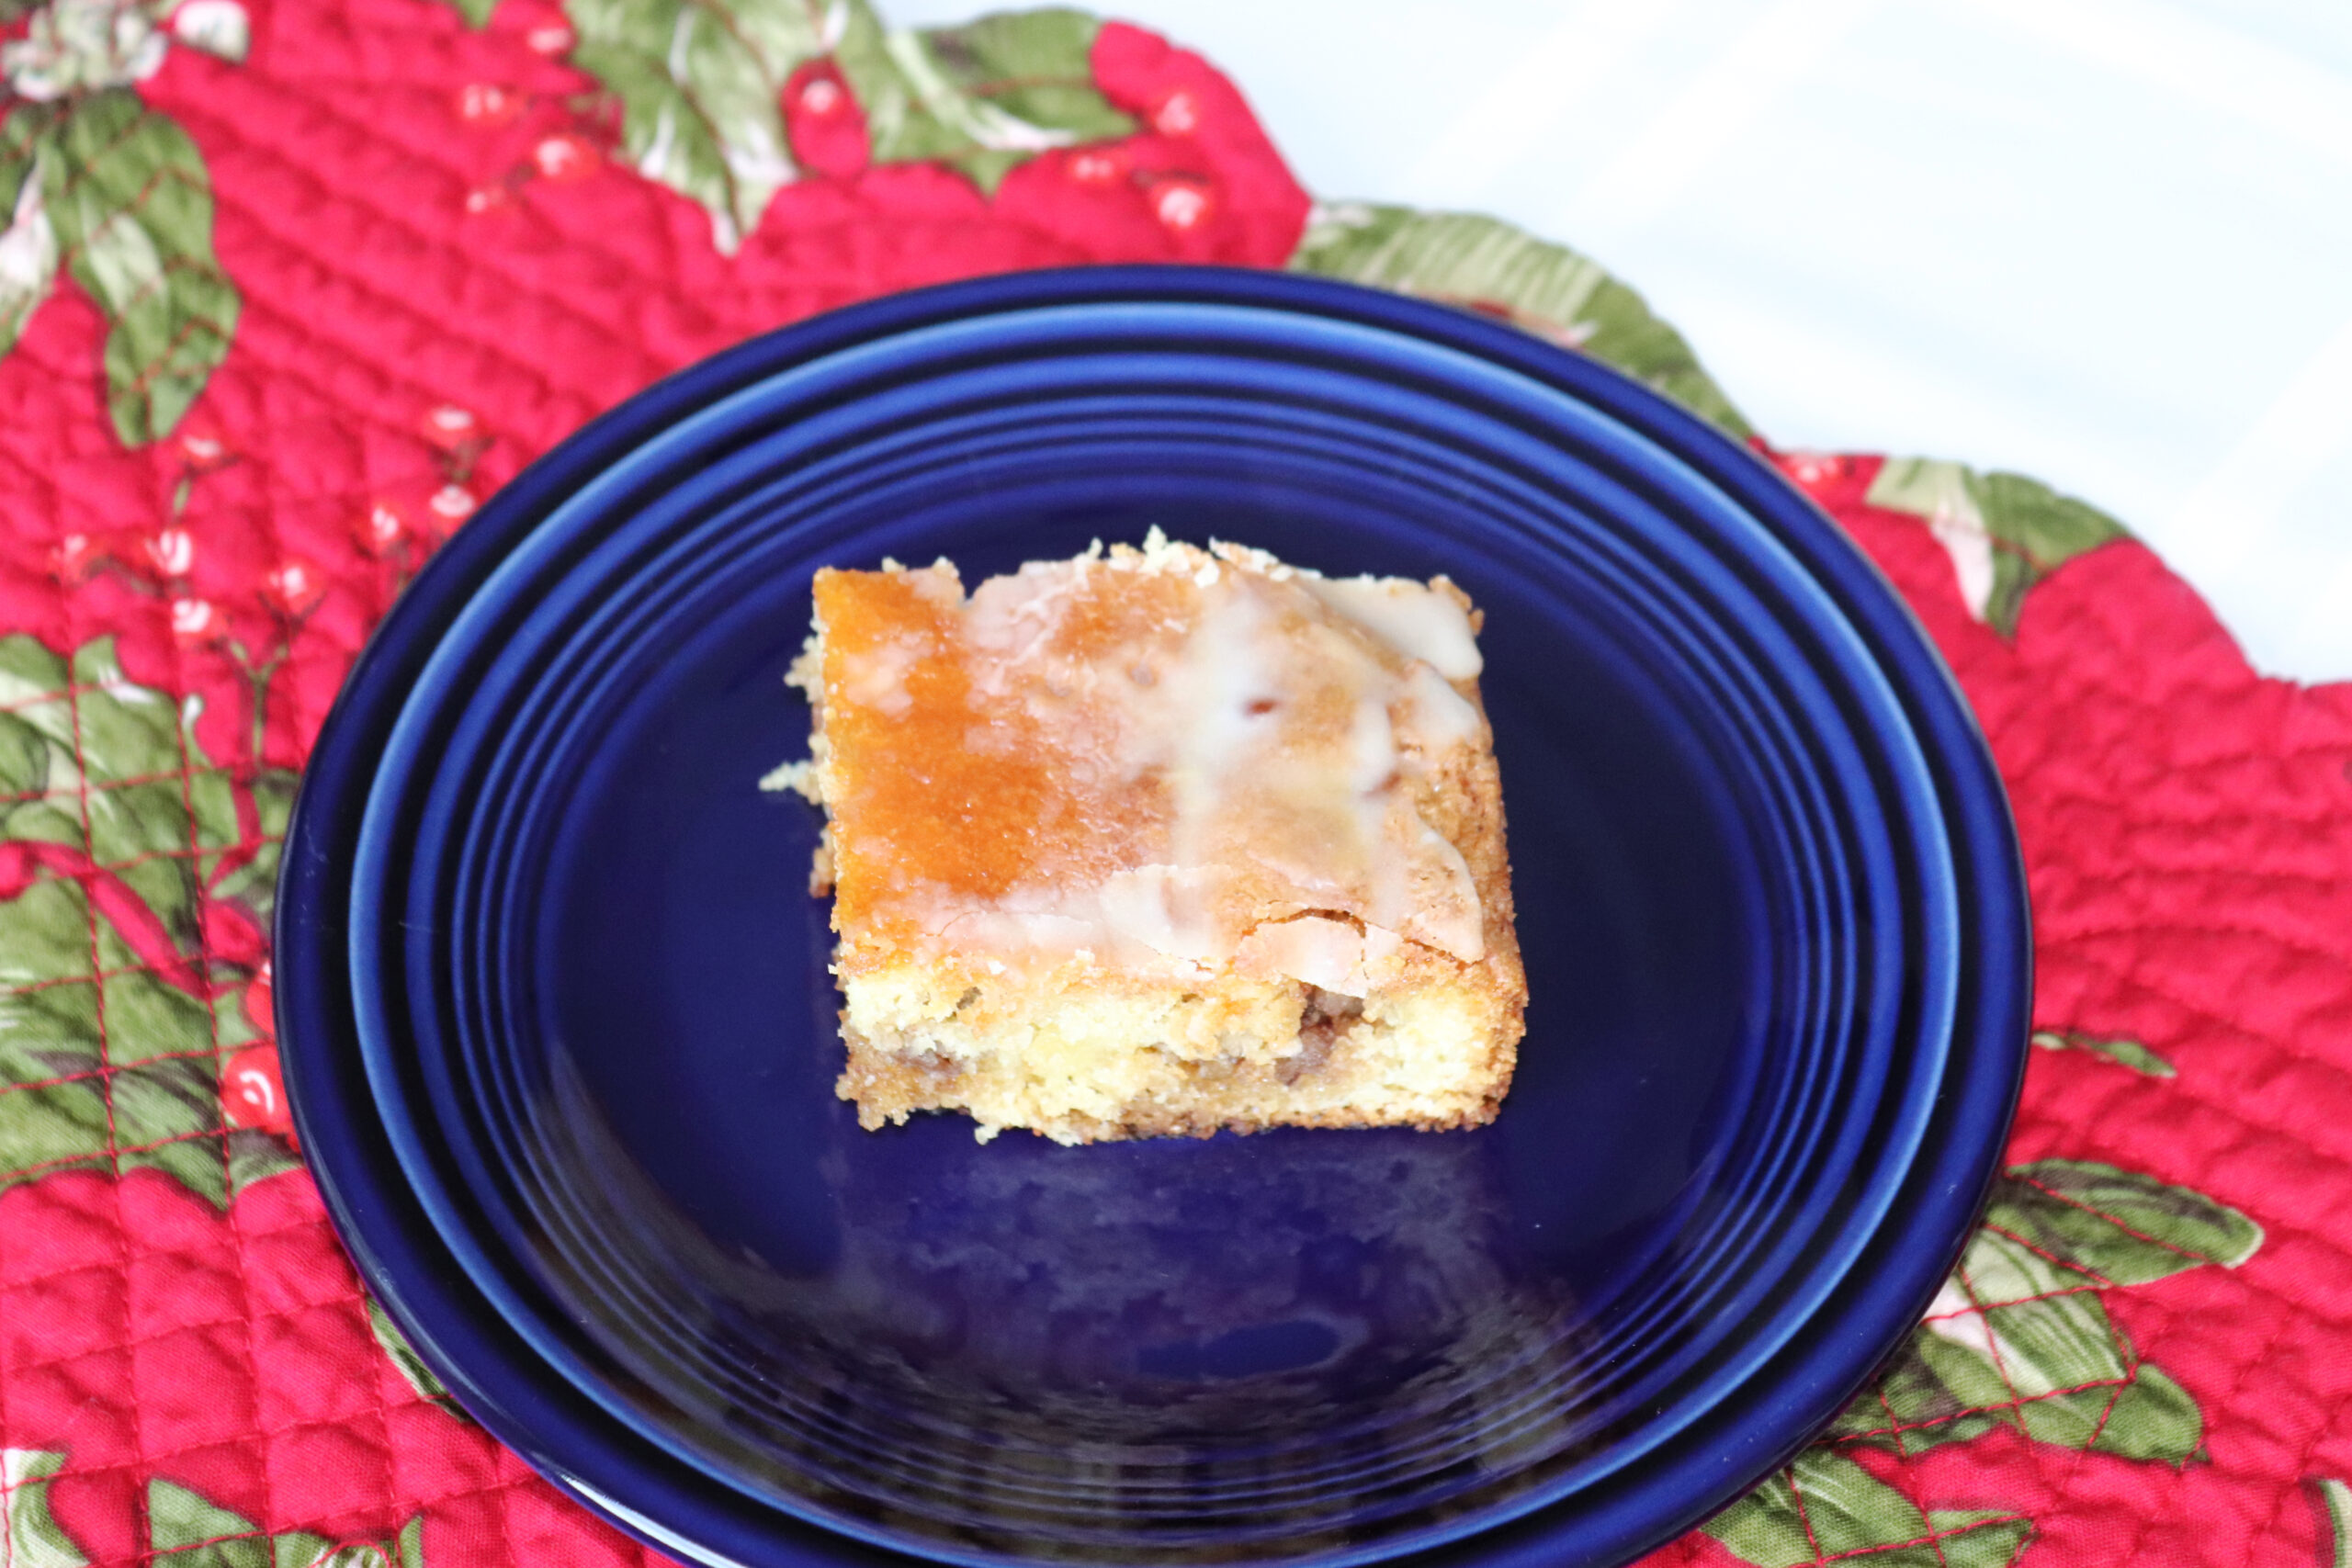 A slice of honey bun cake on a navy blue plate on a red placemat.